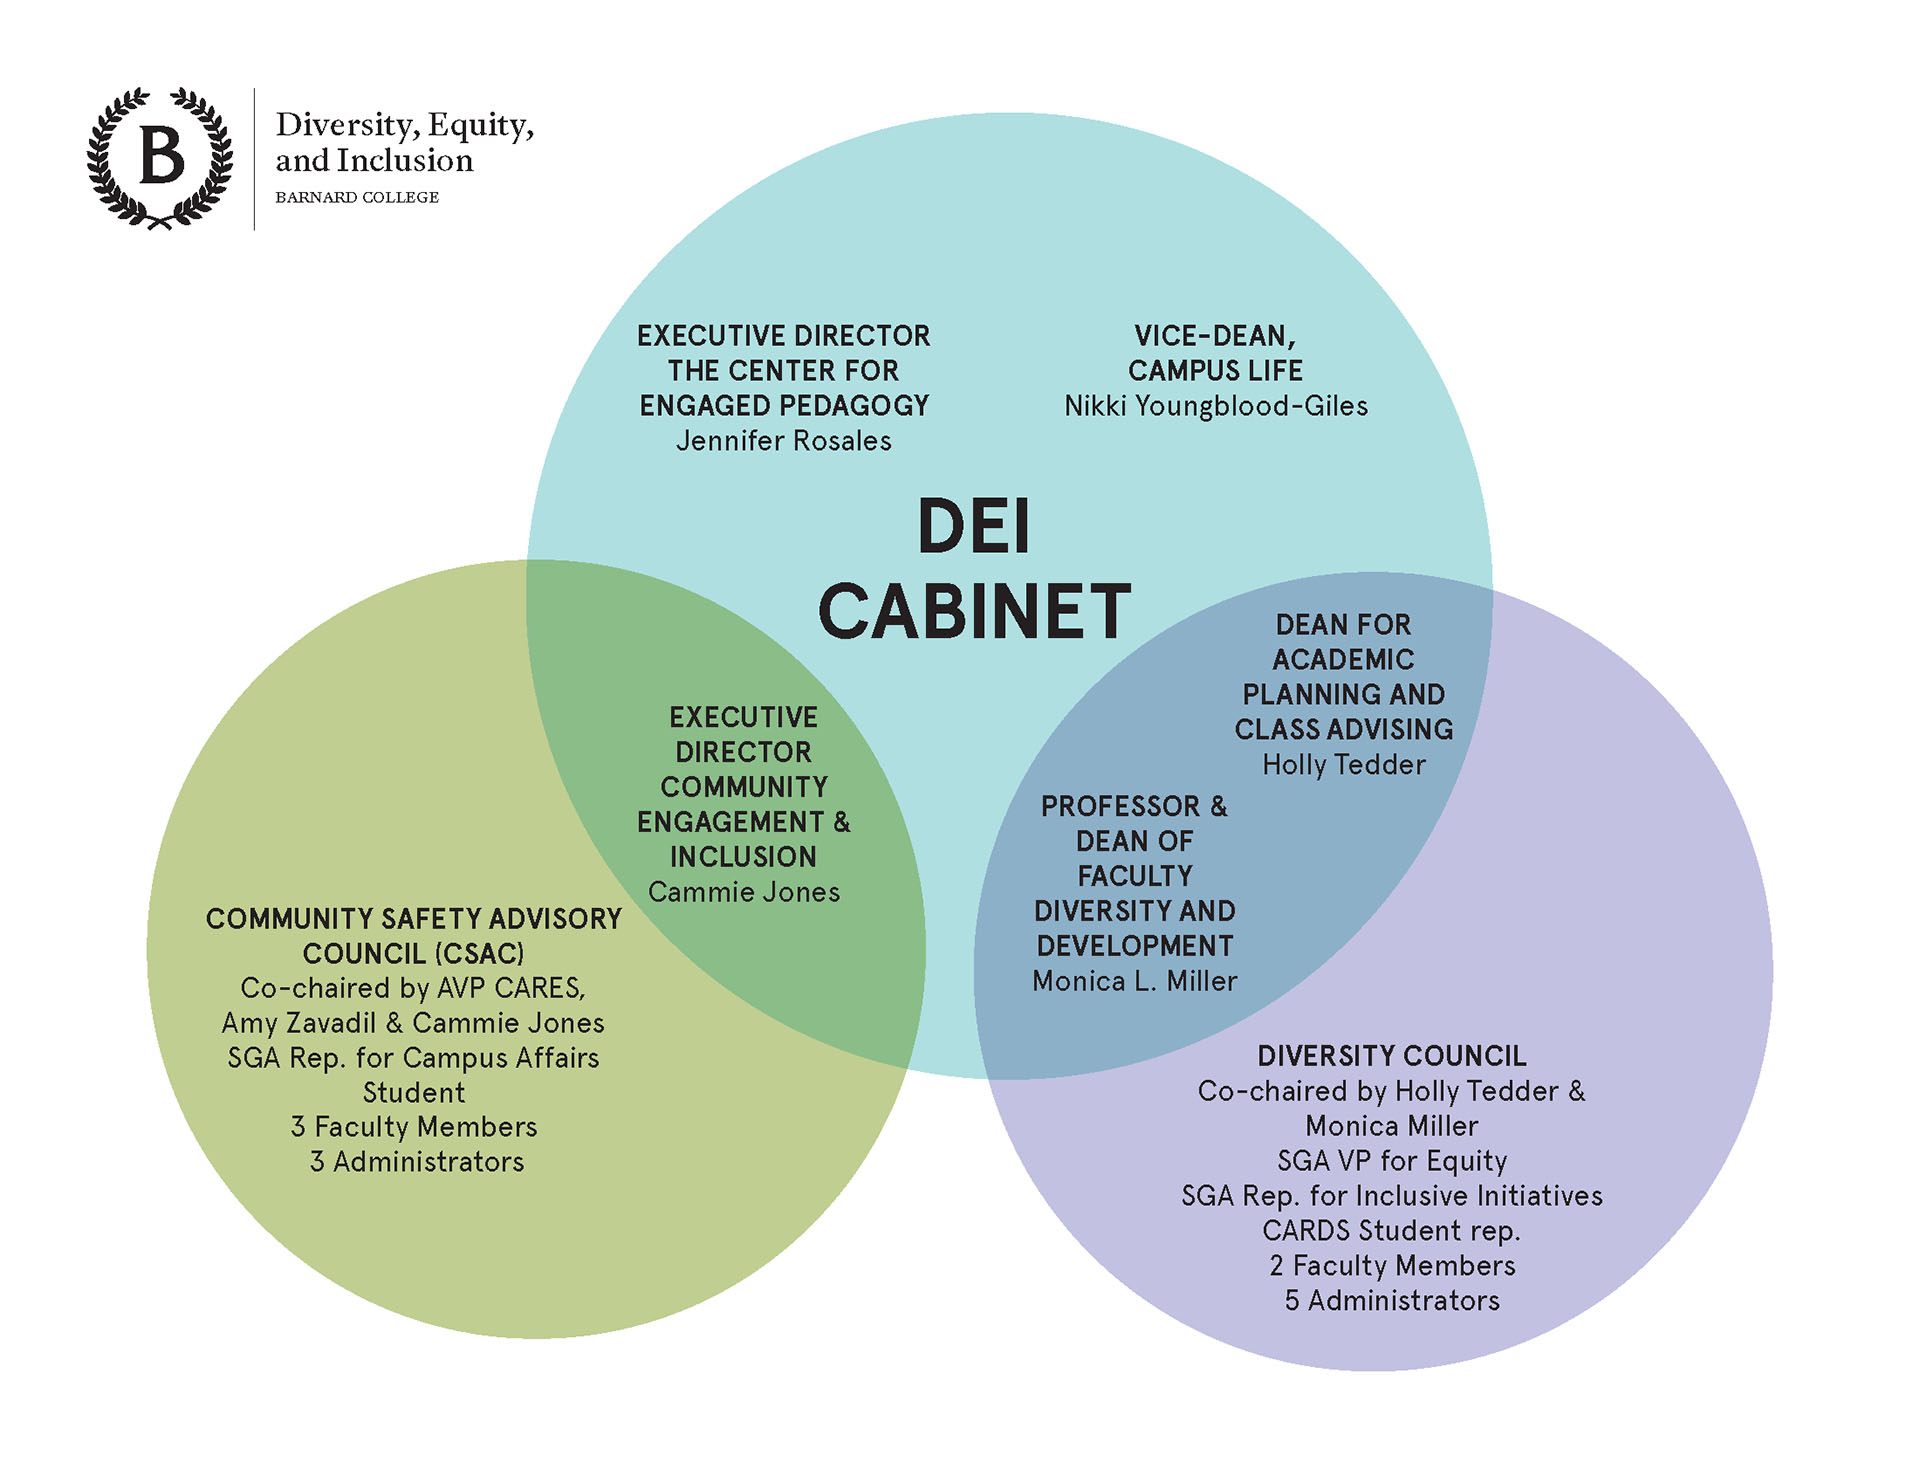 venn diagram showing overlapping memberships between Cabinet, council, and safety advisory council